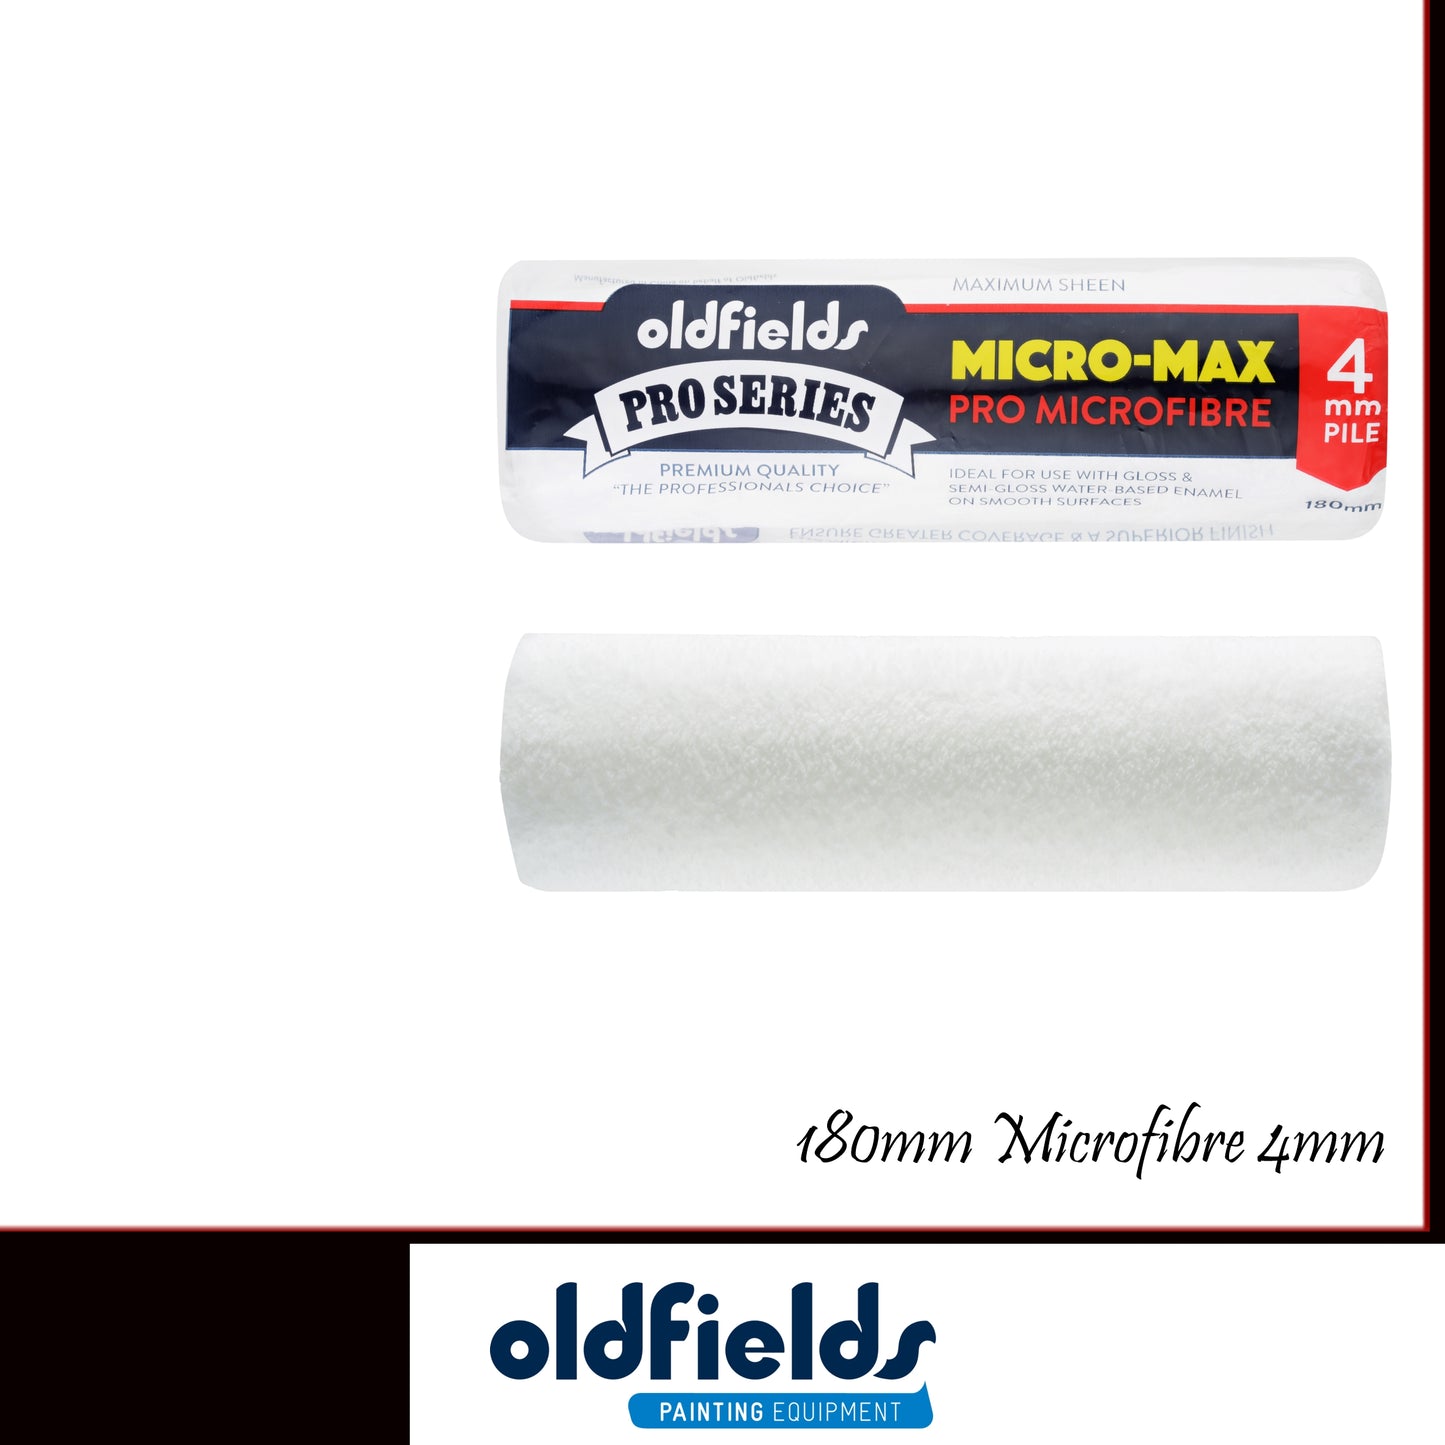 4mm Nap Pro Series Microfibre Paint Roller sleeves from Oldfields